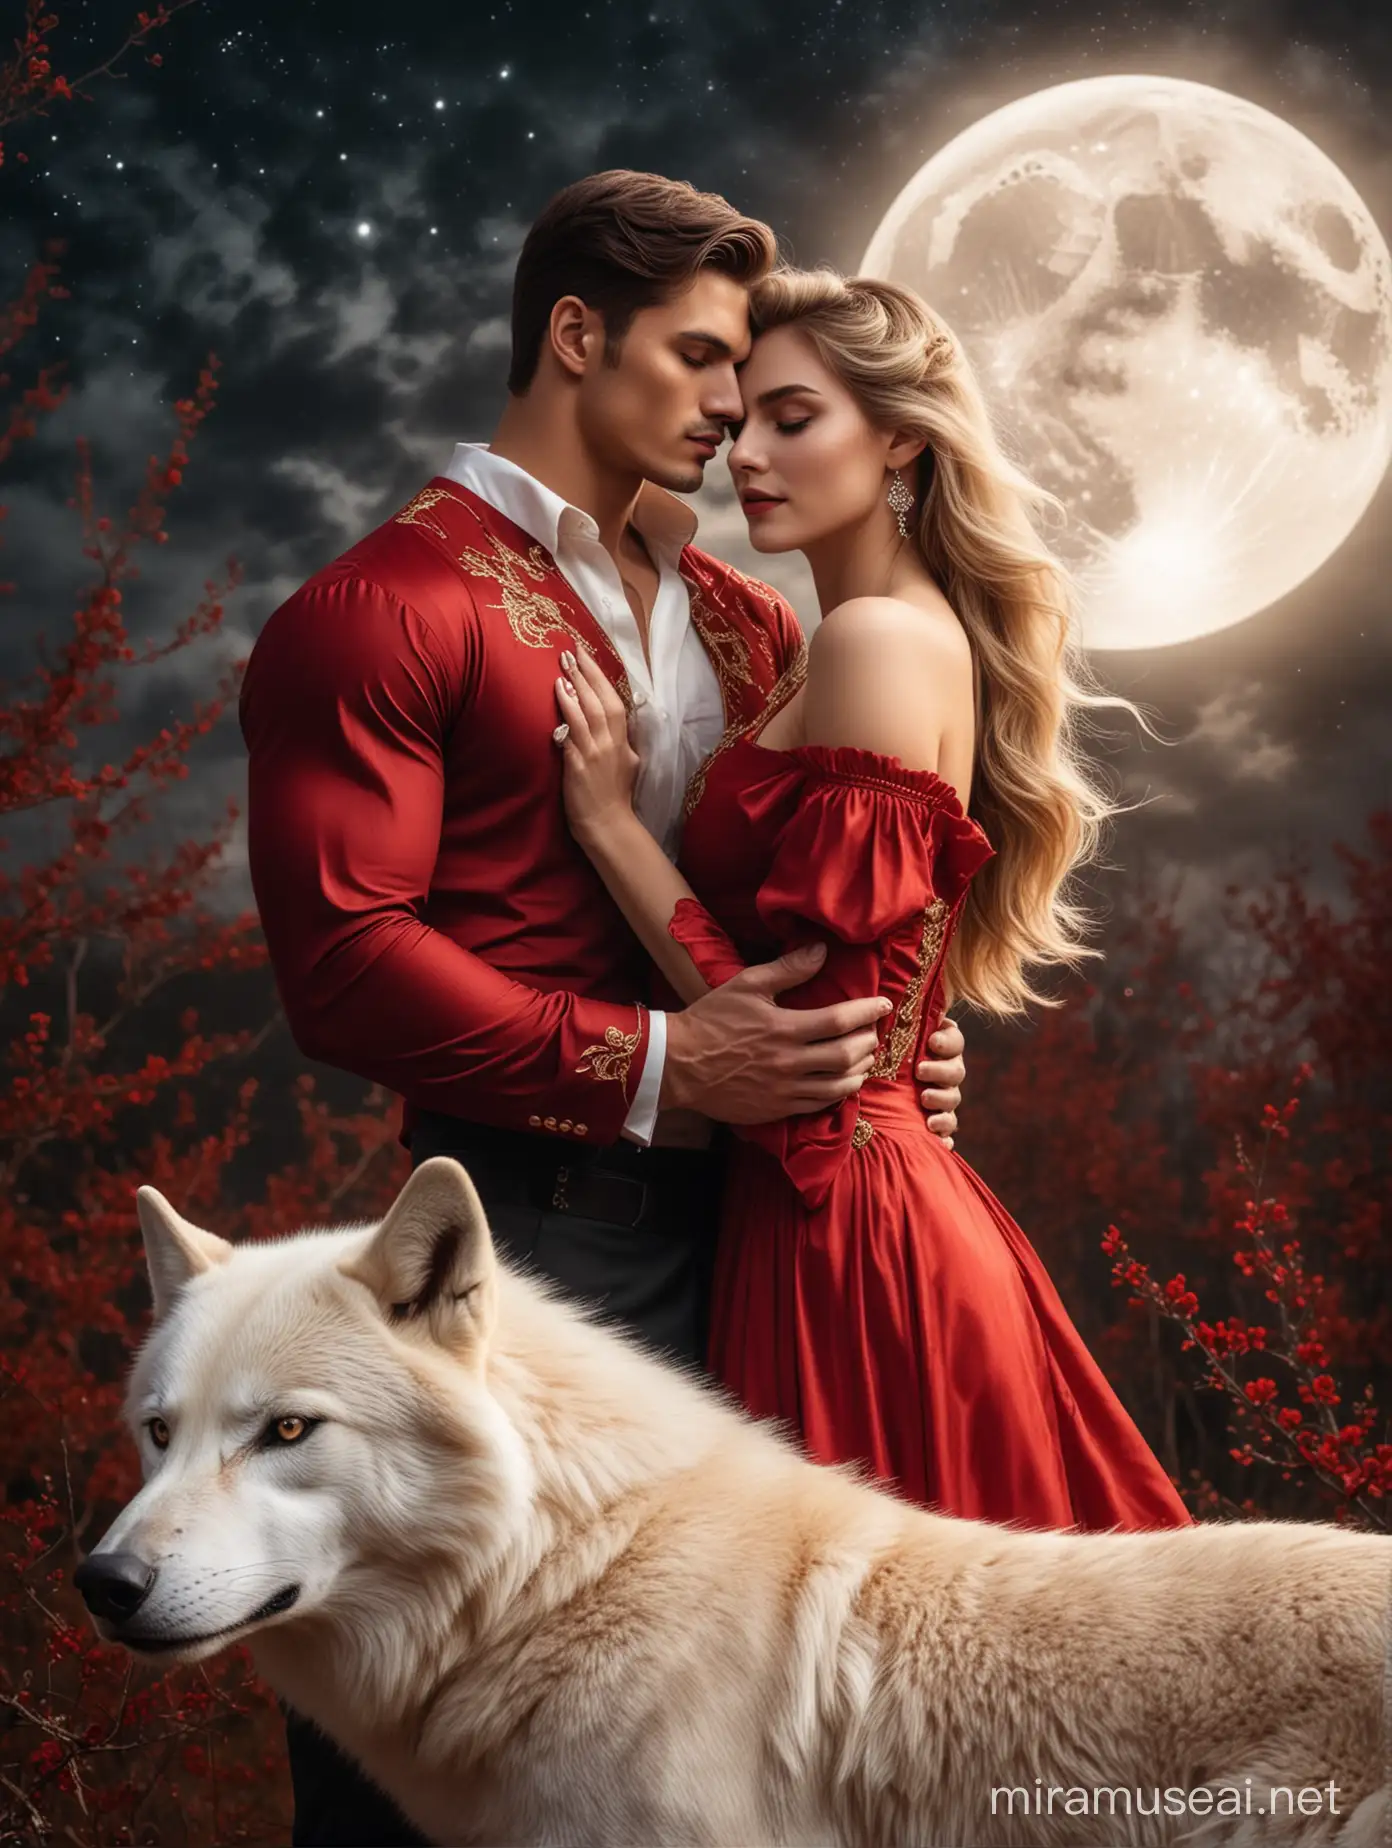 Elegant Couple with Luminous Wolf and Moonlit Sky